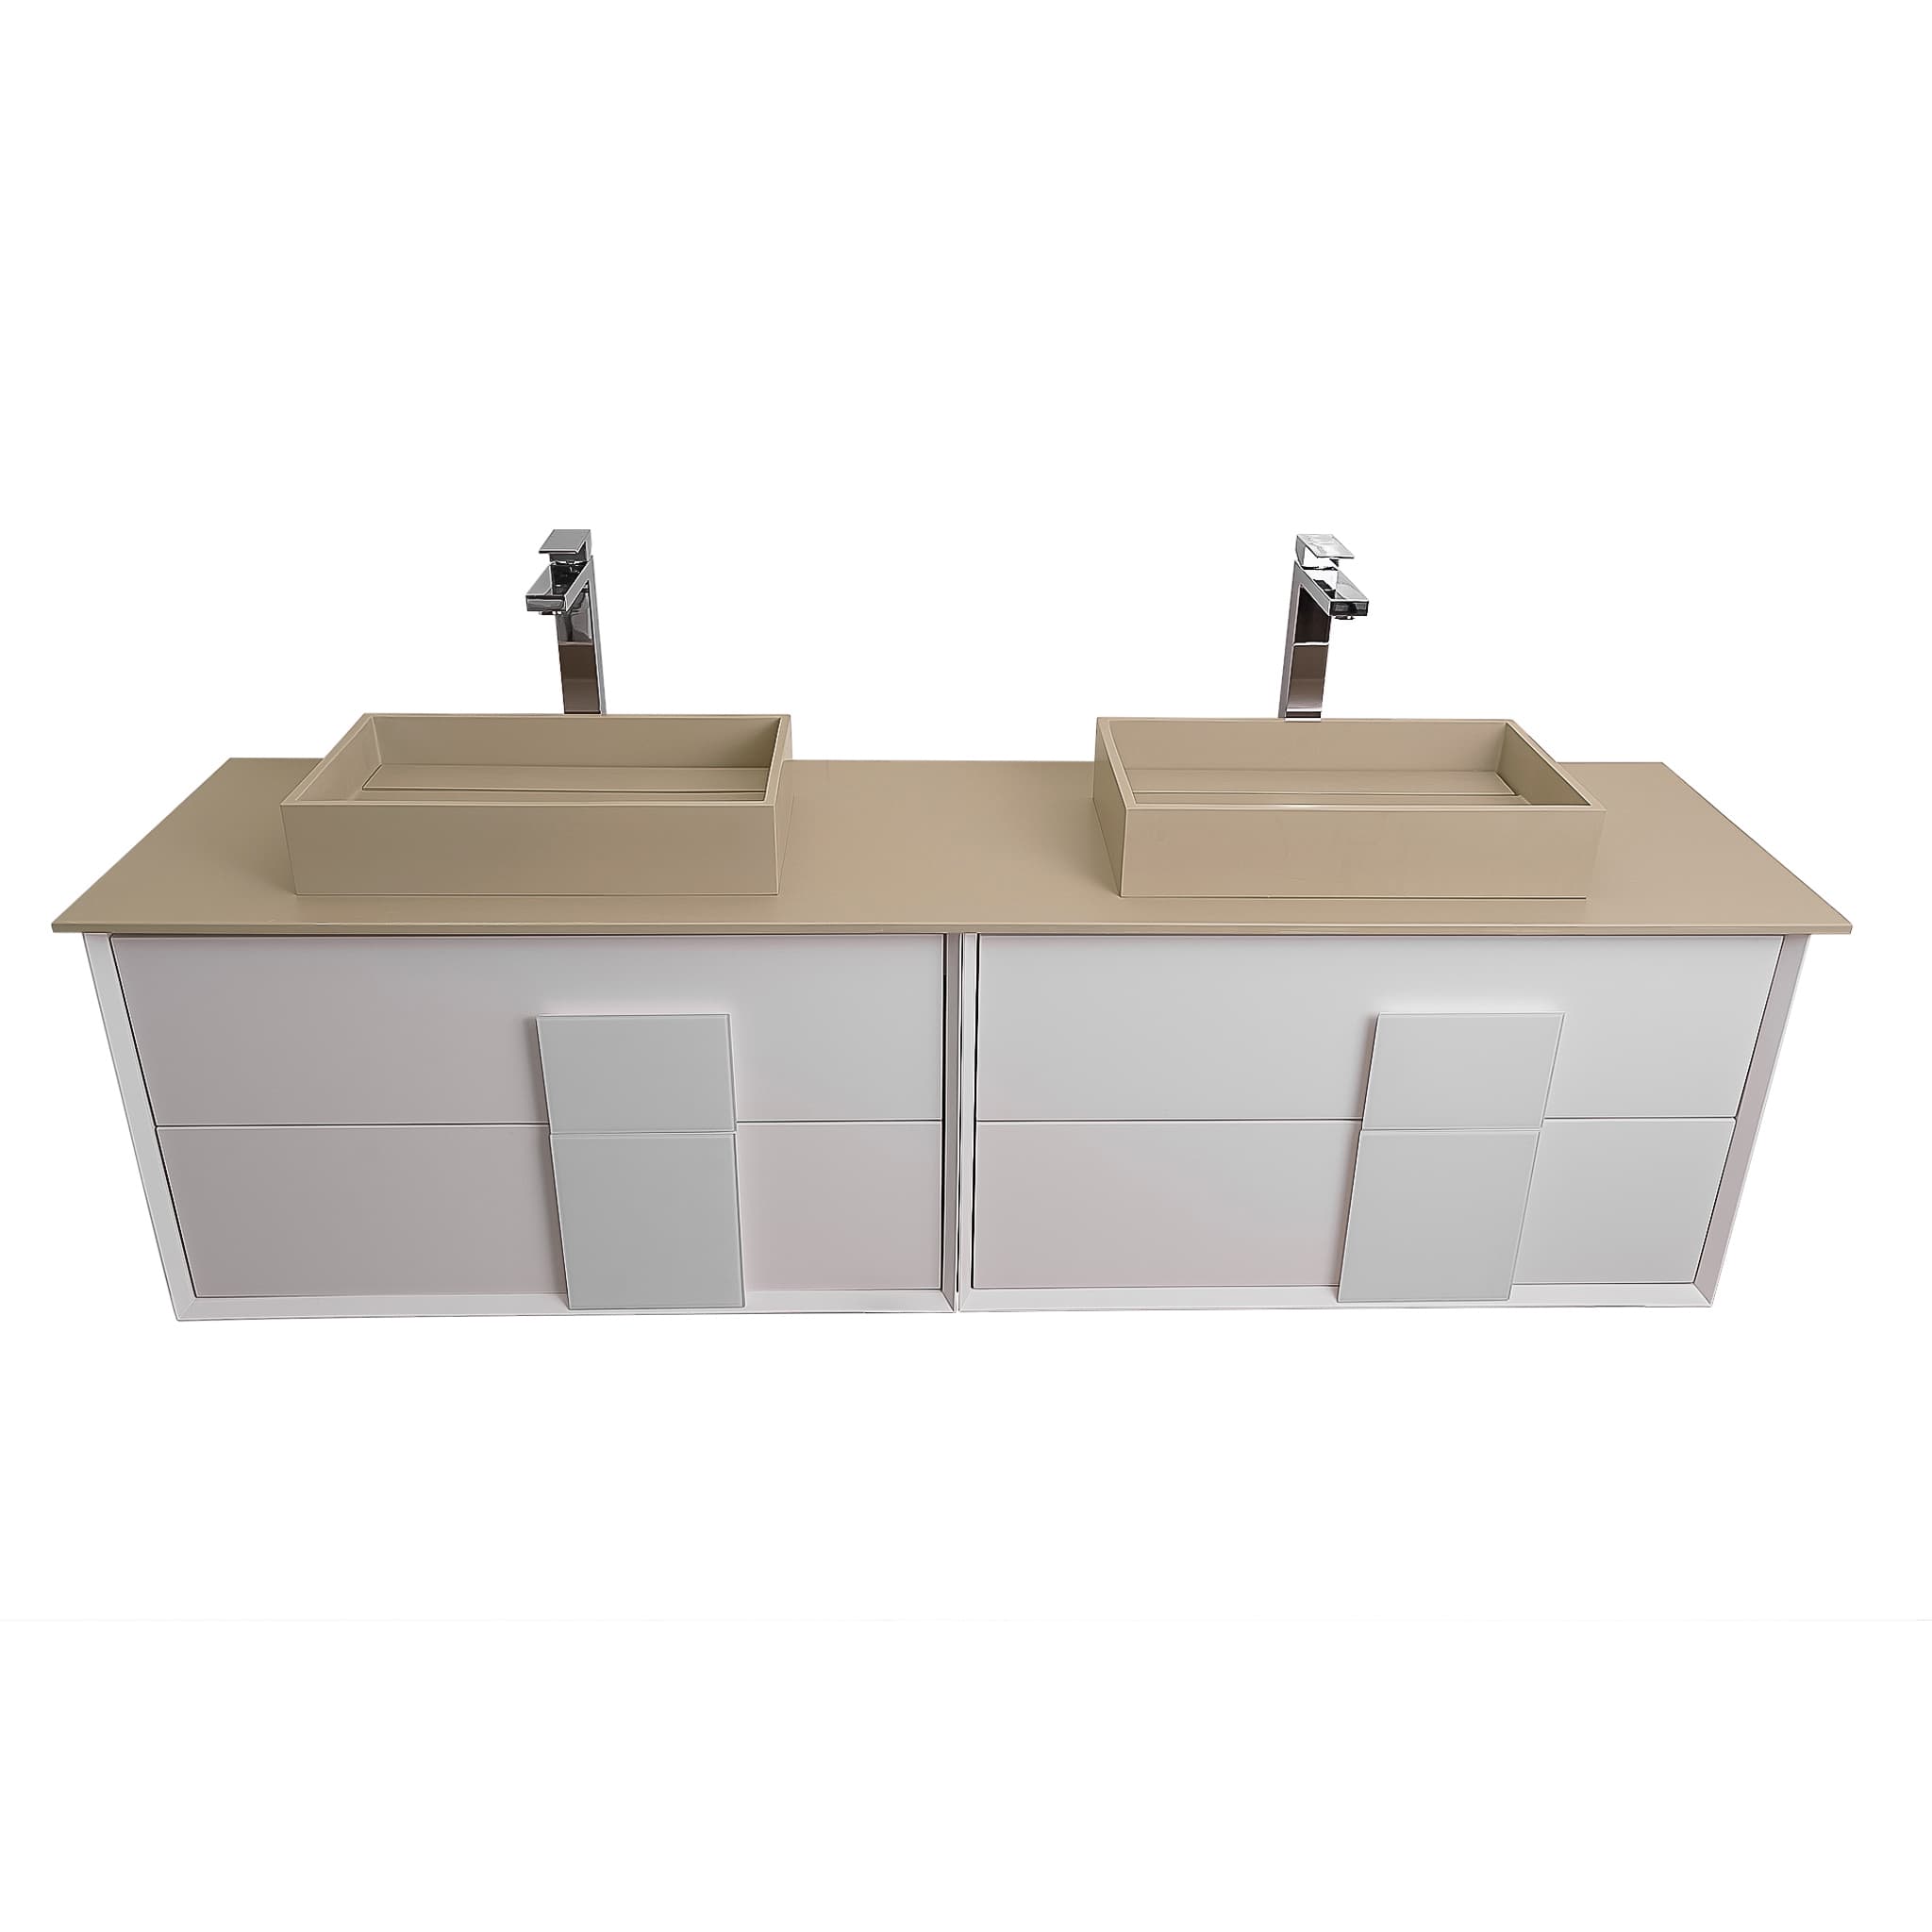 Piazza 63 Matte White With White Handle Cabinet, Solid Surface Flat Taupe Counter and Two Infinity Square Solid Surface Taupe Basin 1329, Wall Mounted Modern Vanity Set